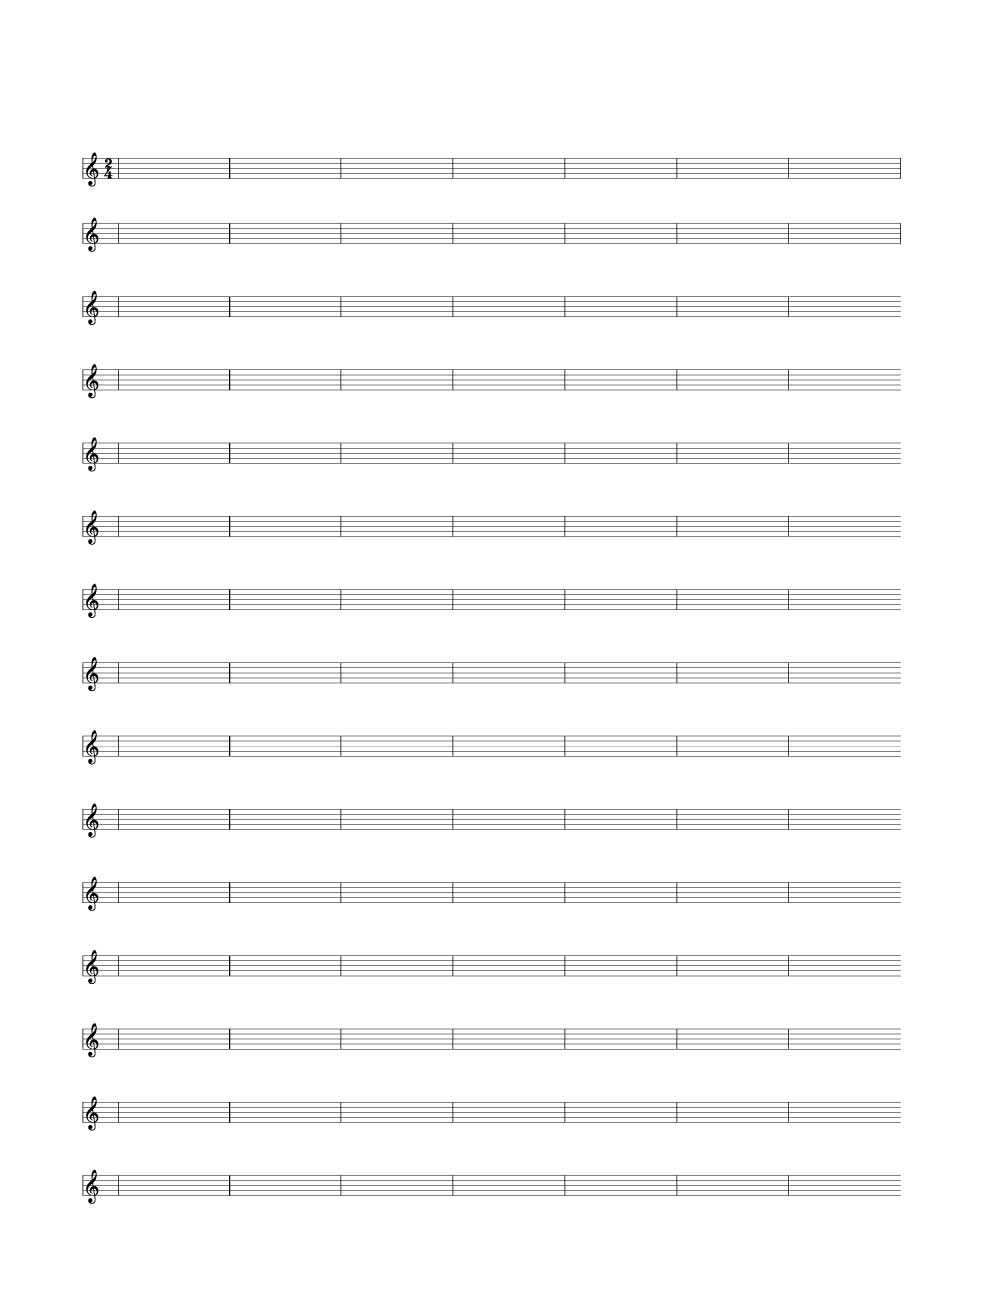 2/4 Time Signature Single Bar Blank Sheet Music | Woo! Jr With Blank Sheet Music Template For Word